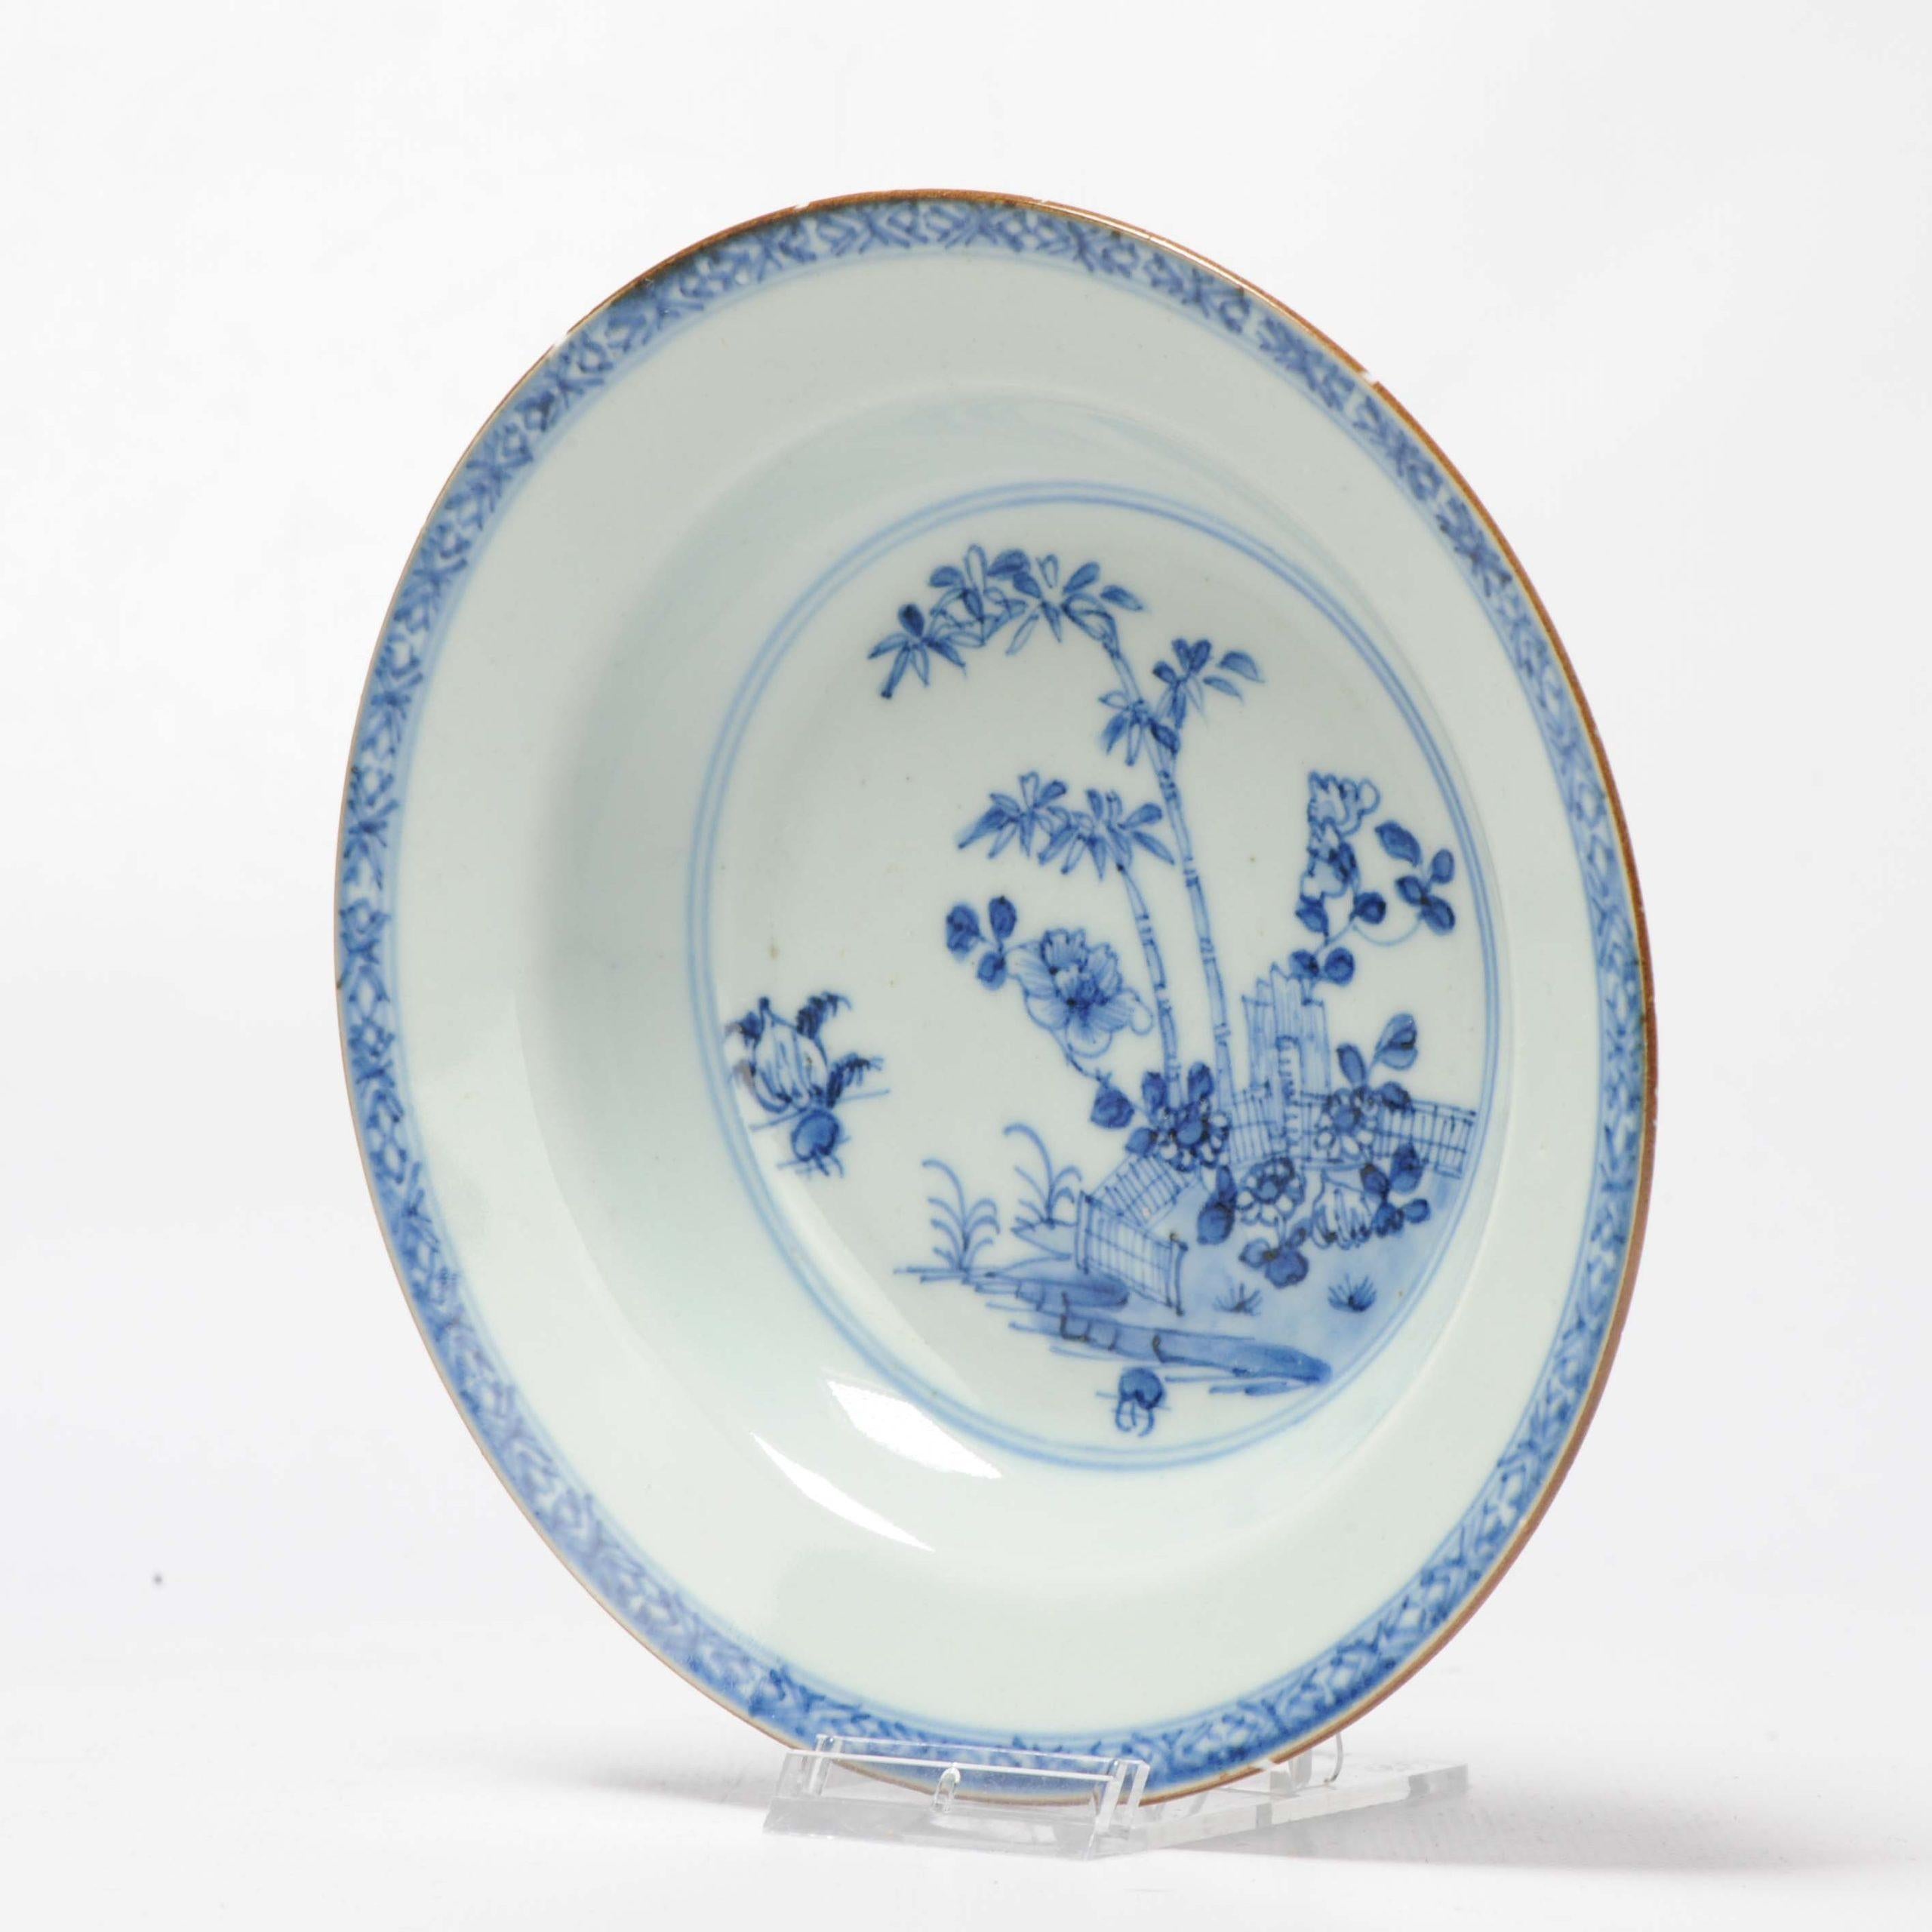 A very nice deep dish from the Kangxi or Yongzheng period.

Additional information:
Material: Porcelain & Pottery
Type: Plates
Region of Origin: China
Period: 18th century Qing (1661 - 1912)
Age: Pre-1800
Original/Reproduction: Original